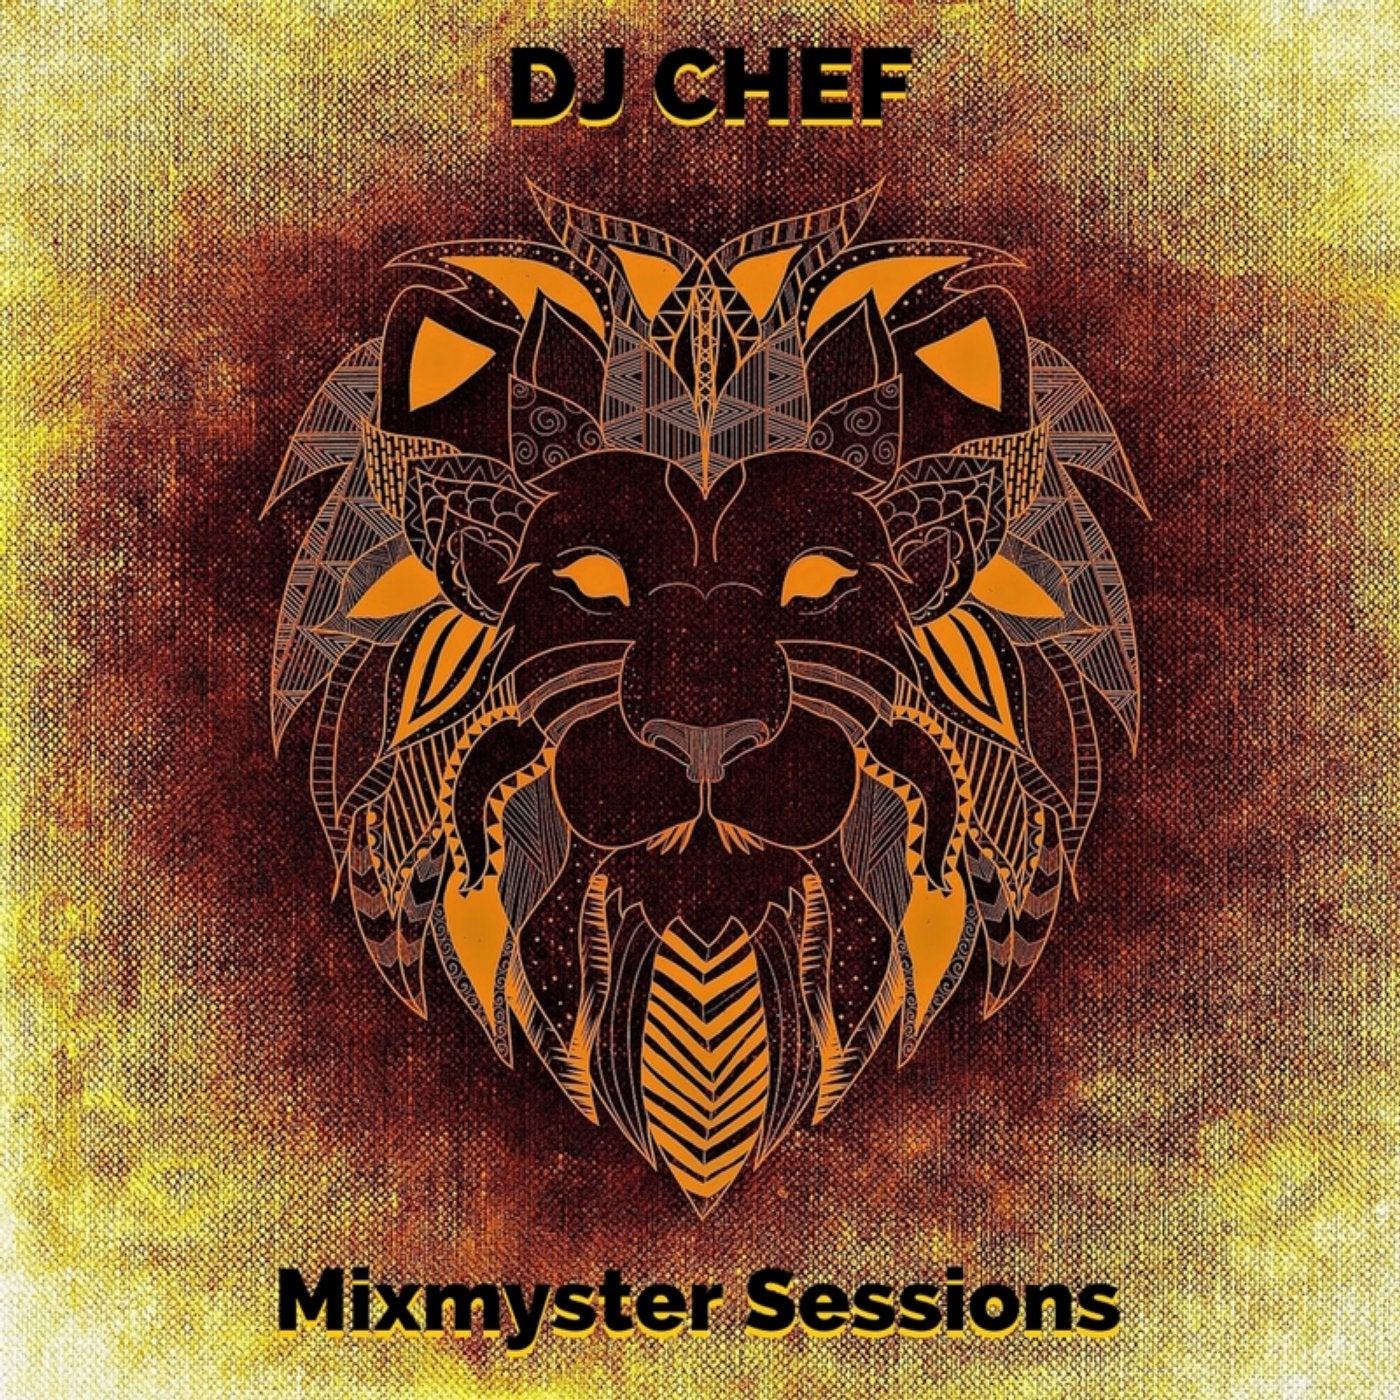 Mixmyster Sessions